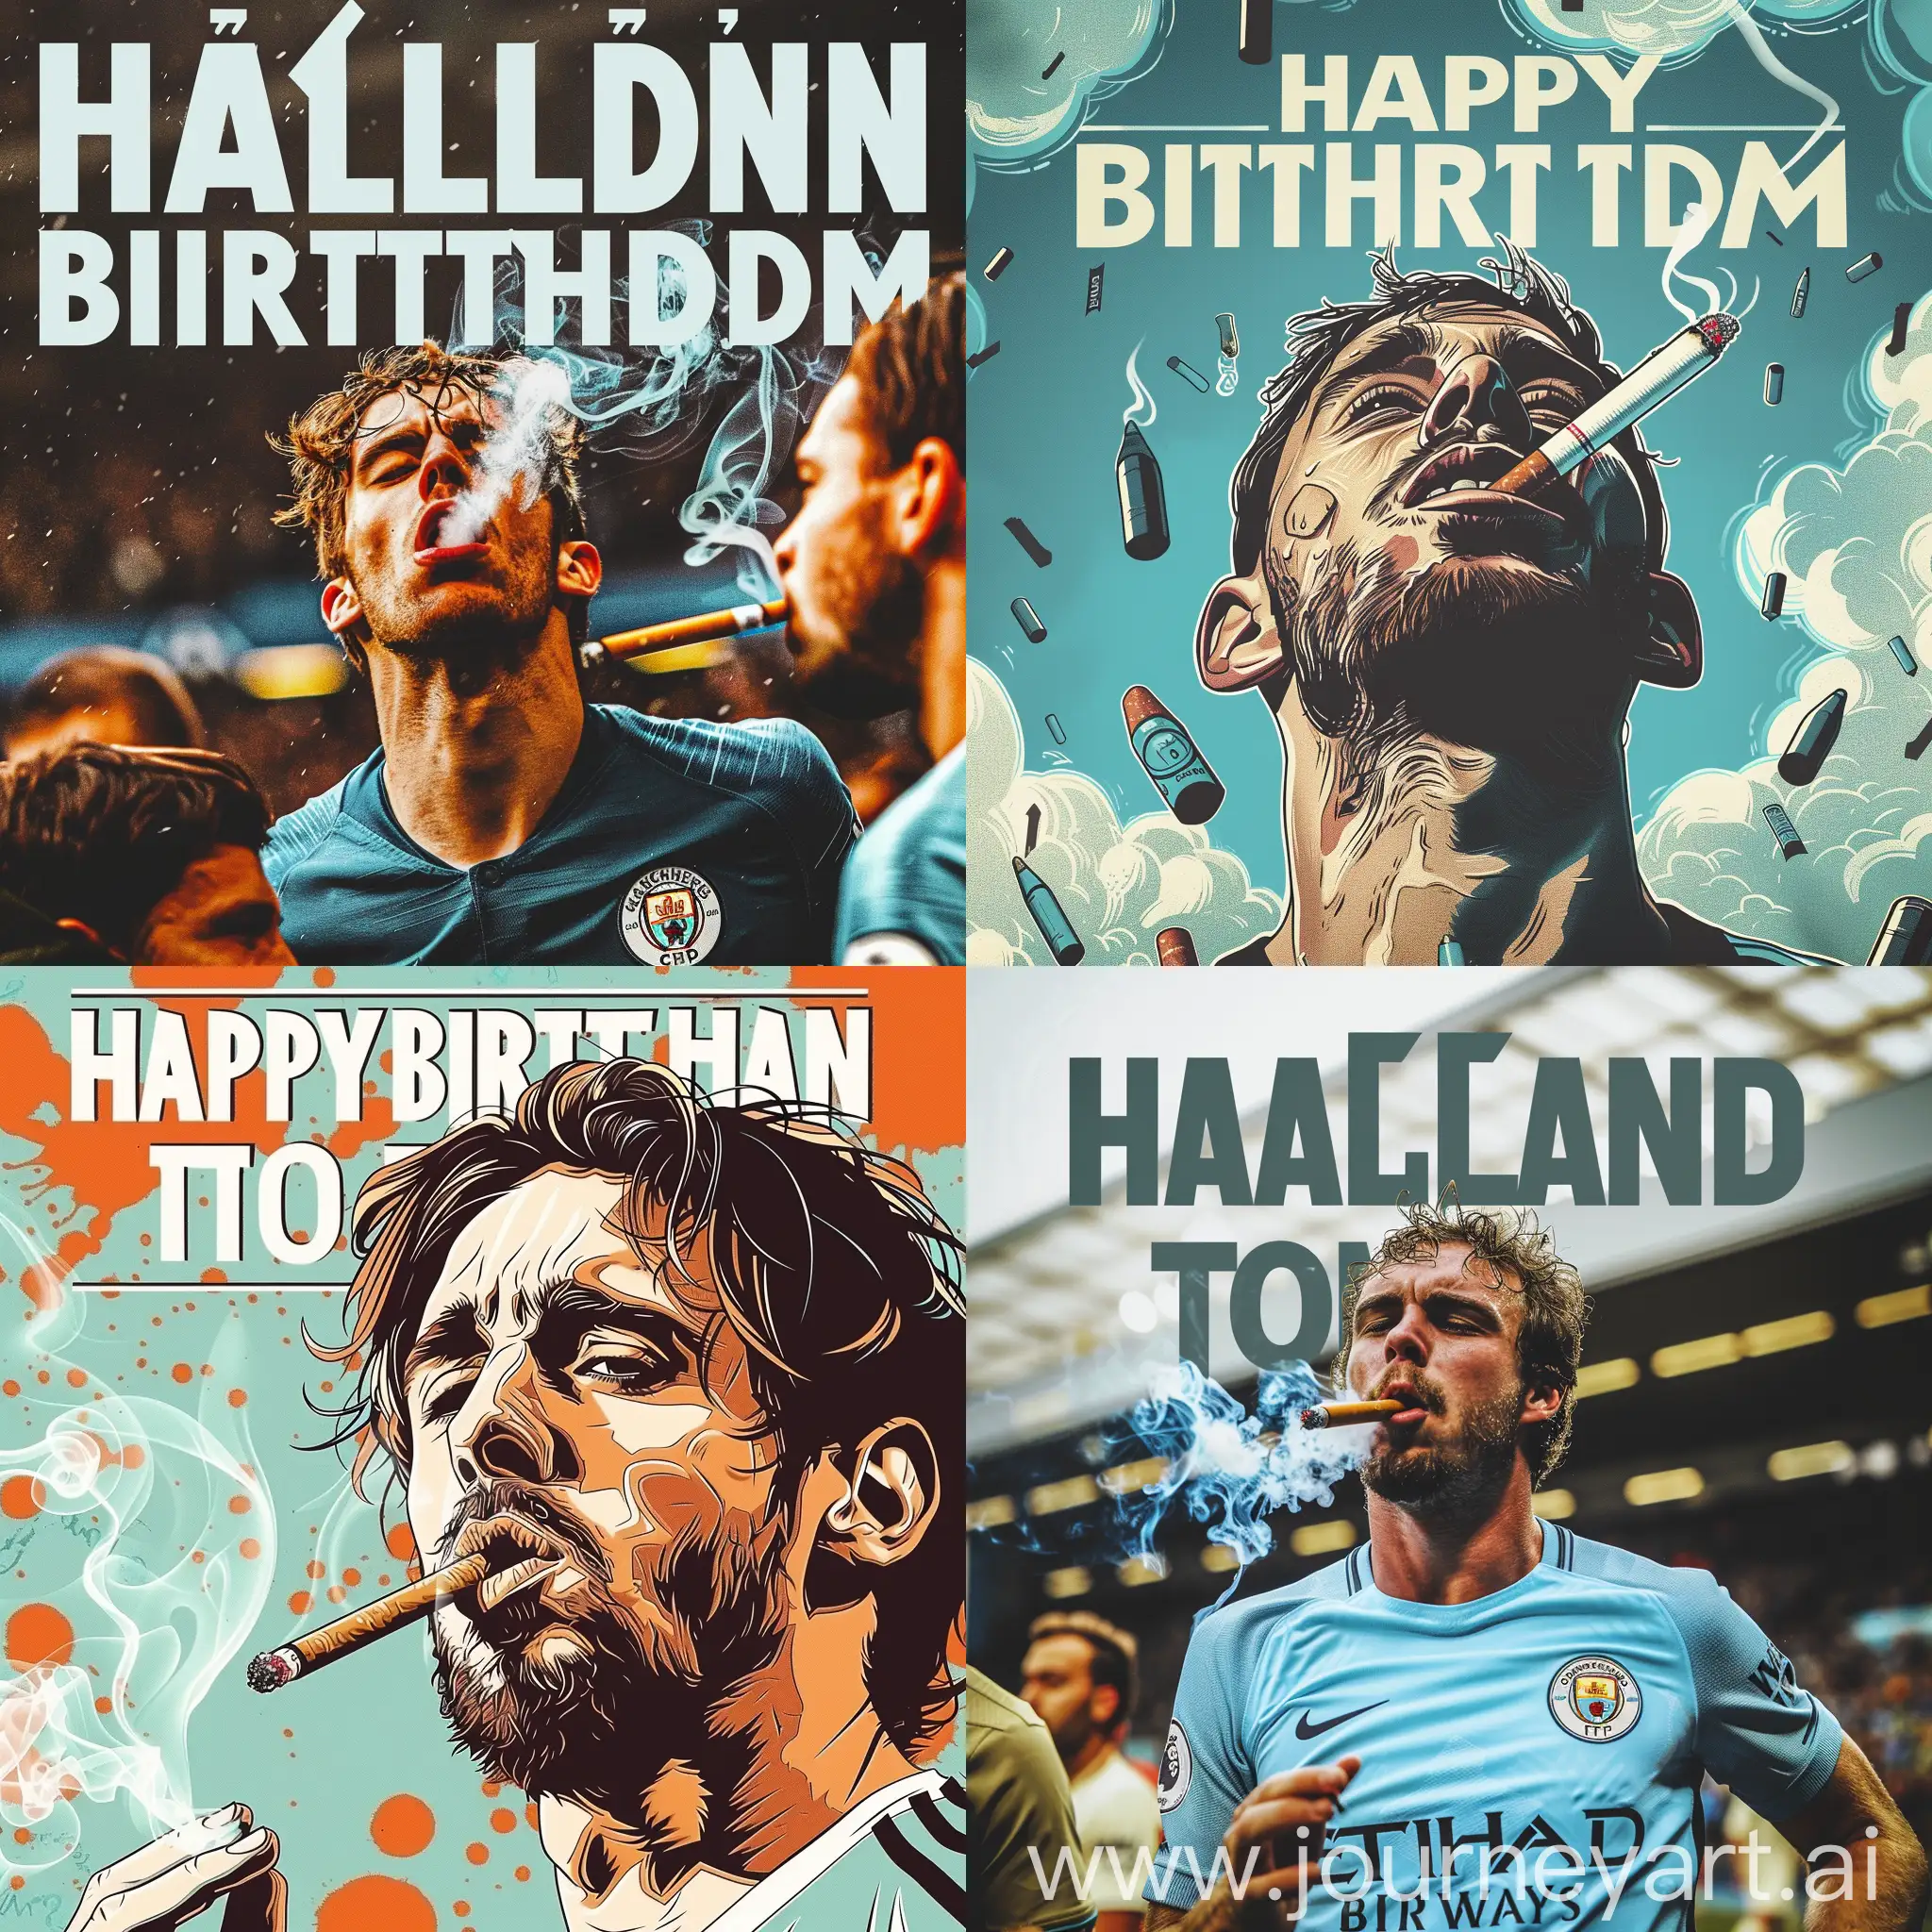 create a funny and cringe man city themed poster with haaland smoking and a title saying happy birthday tom